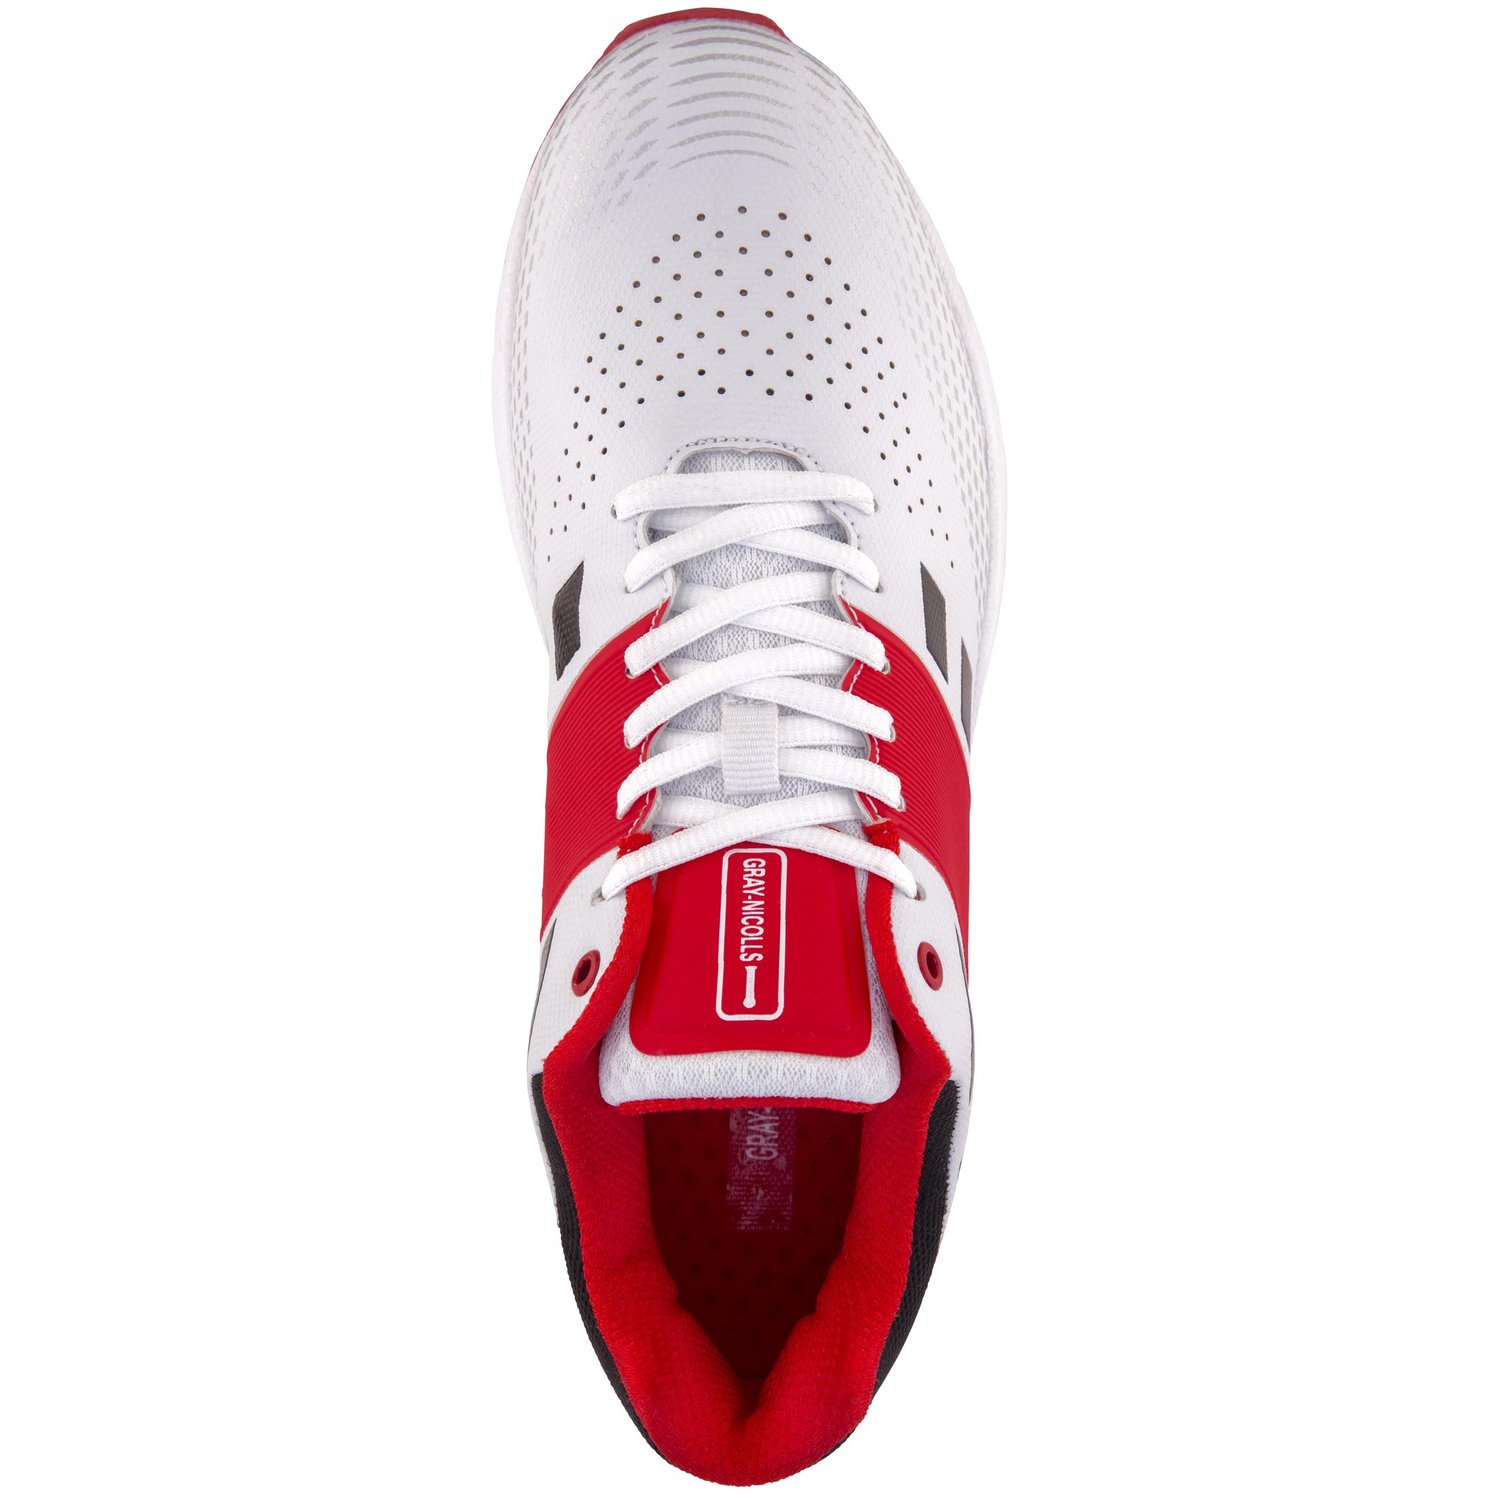 CRICKET SHOES GN VELOCITY 2.0 SPIKE